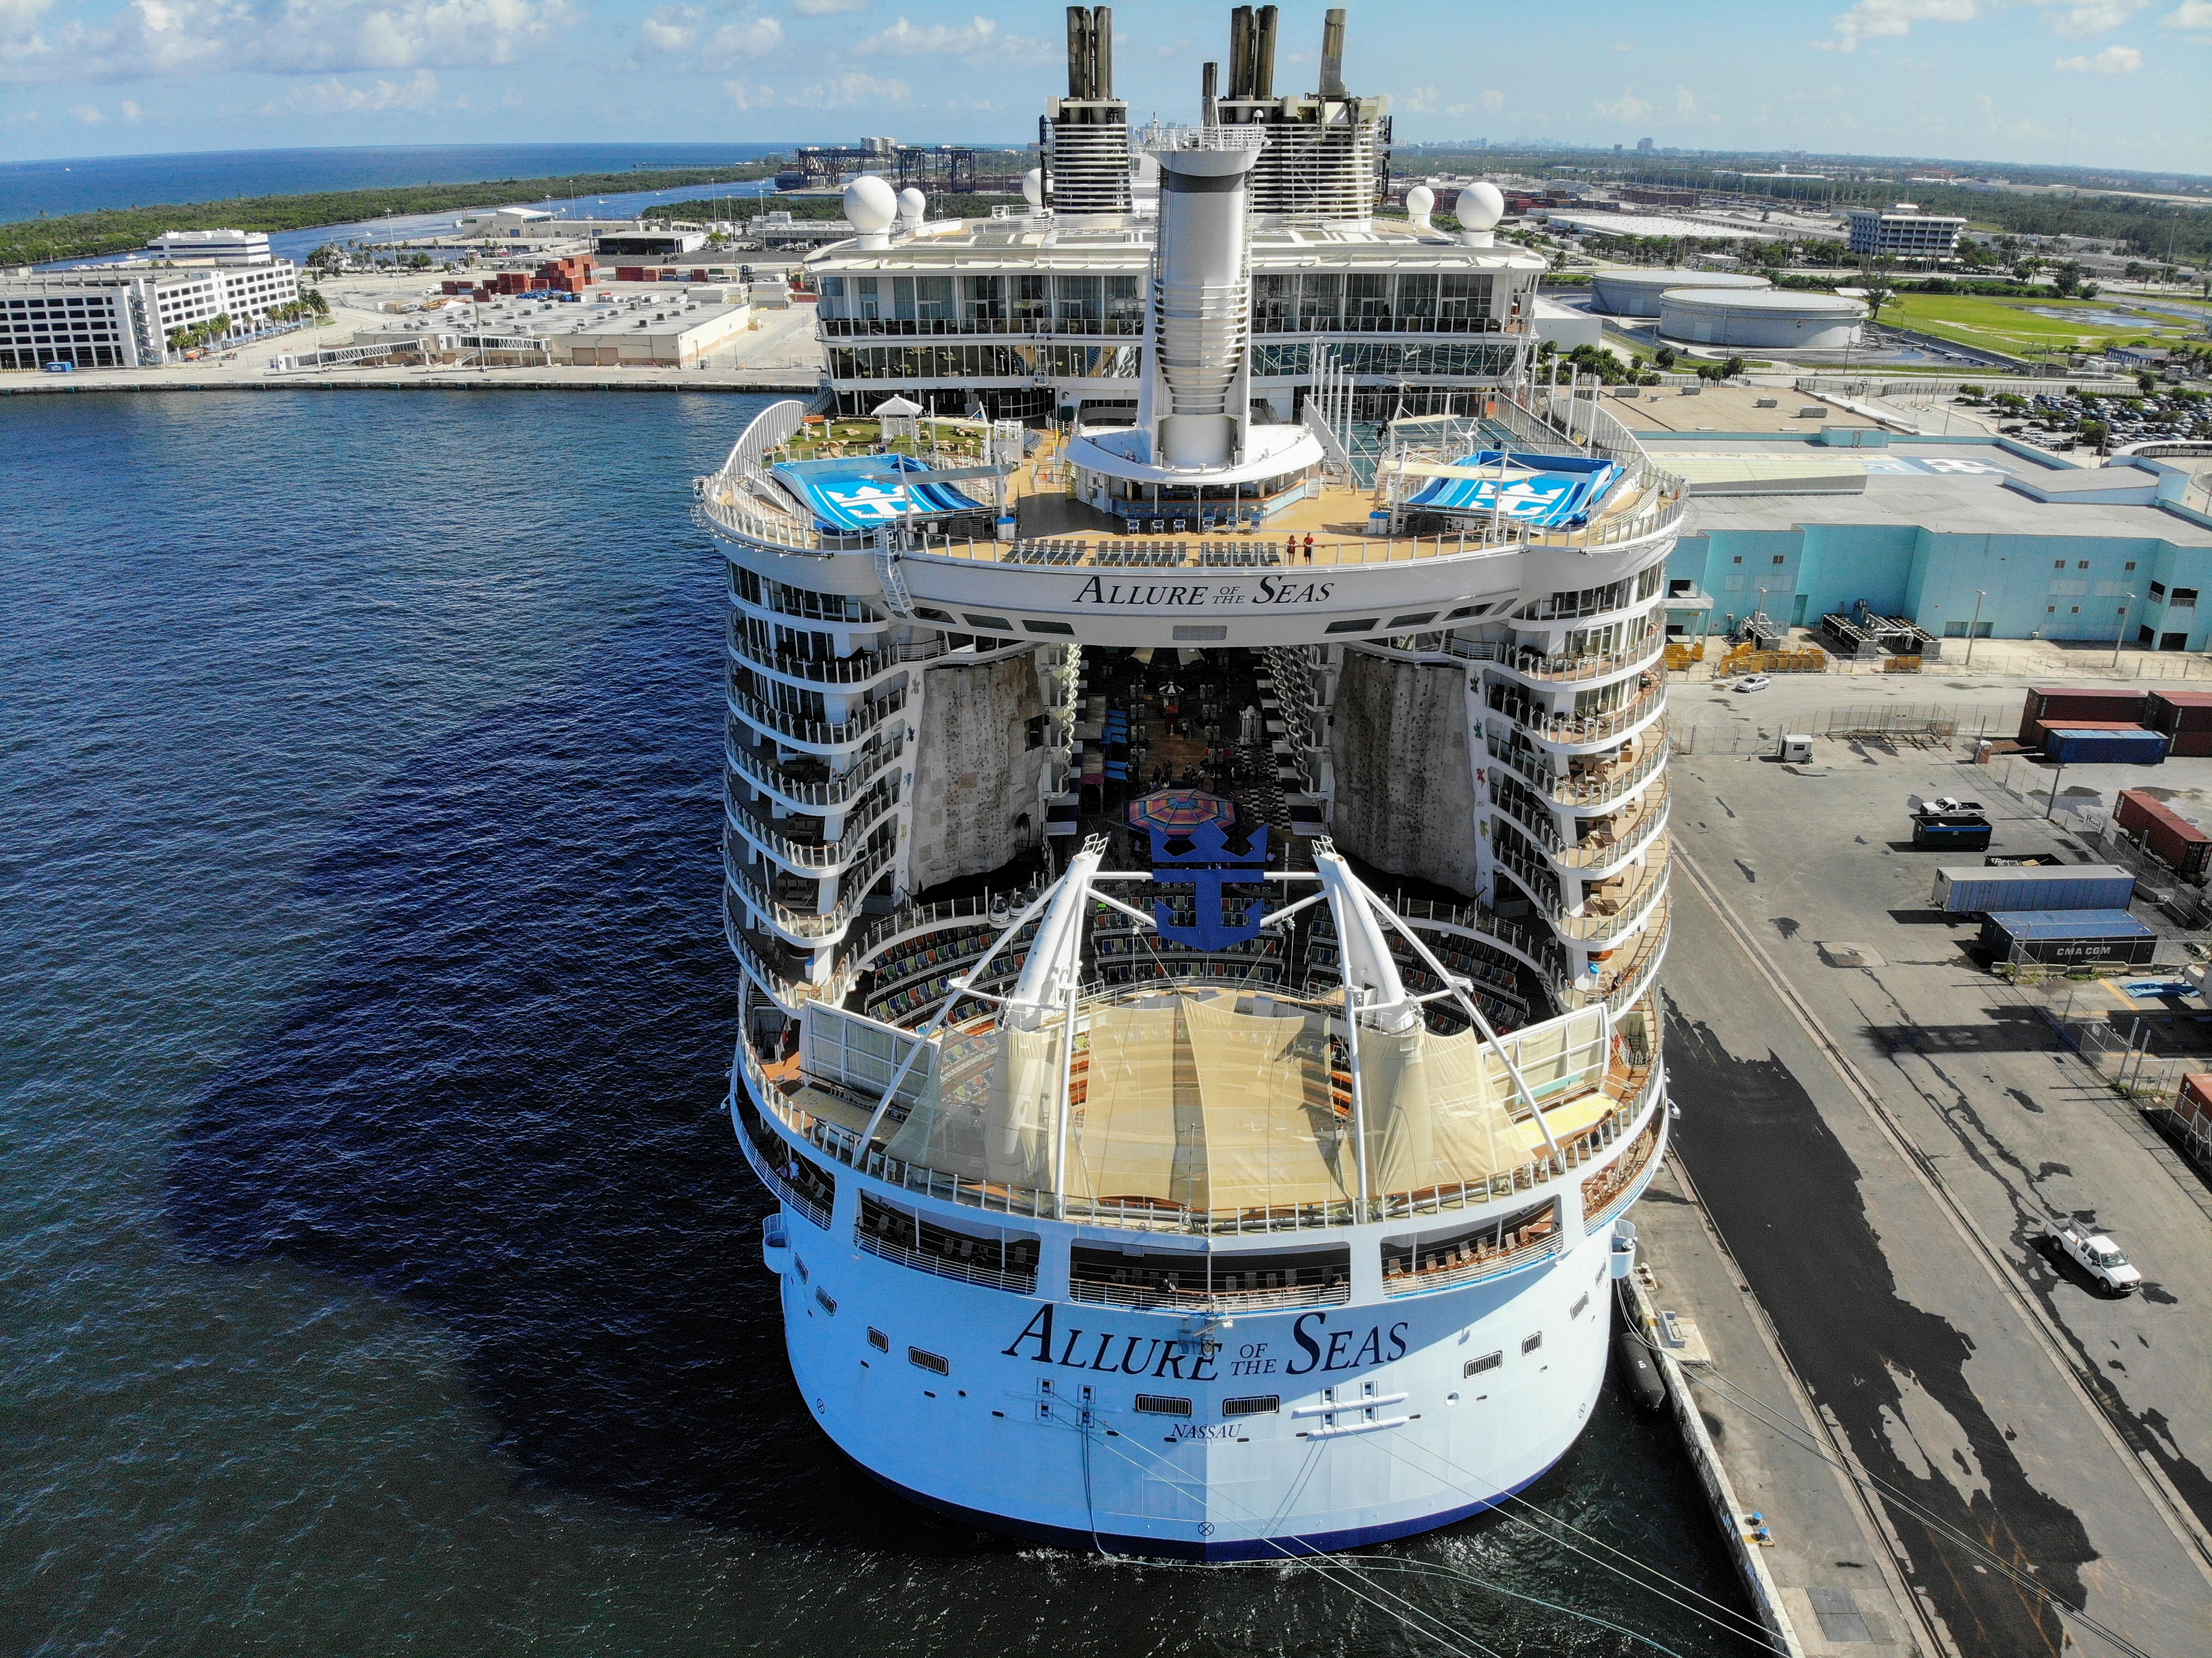 File:Back of the MS Allure of the Seas.jpg - Wikimedia Commons